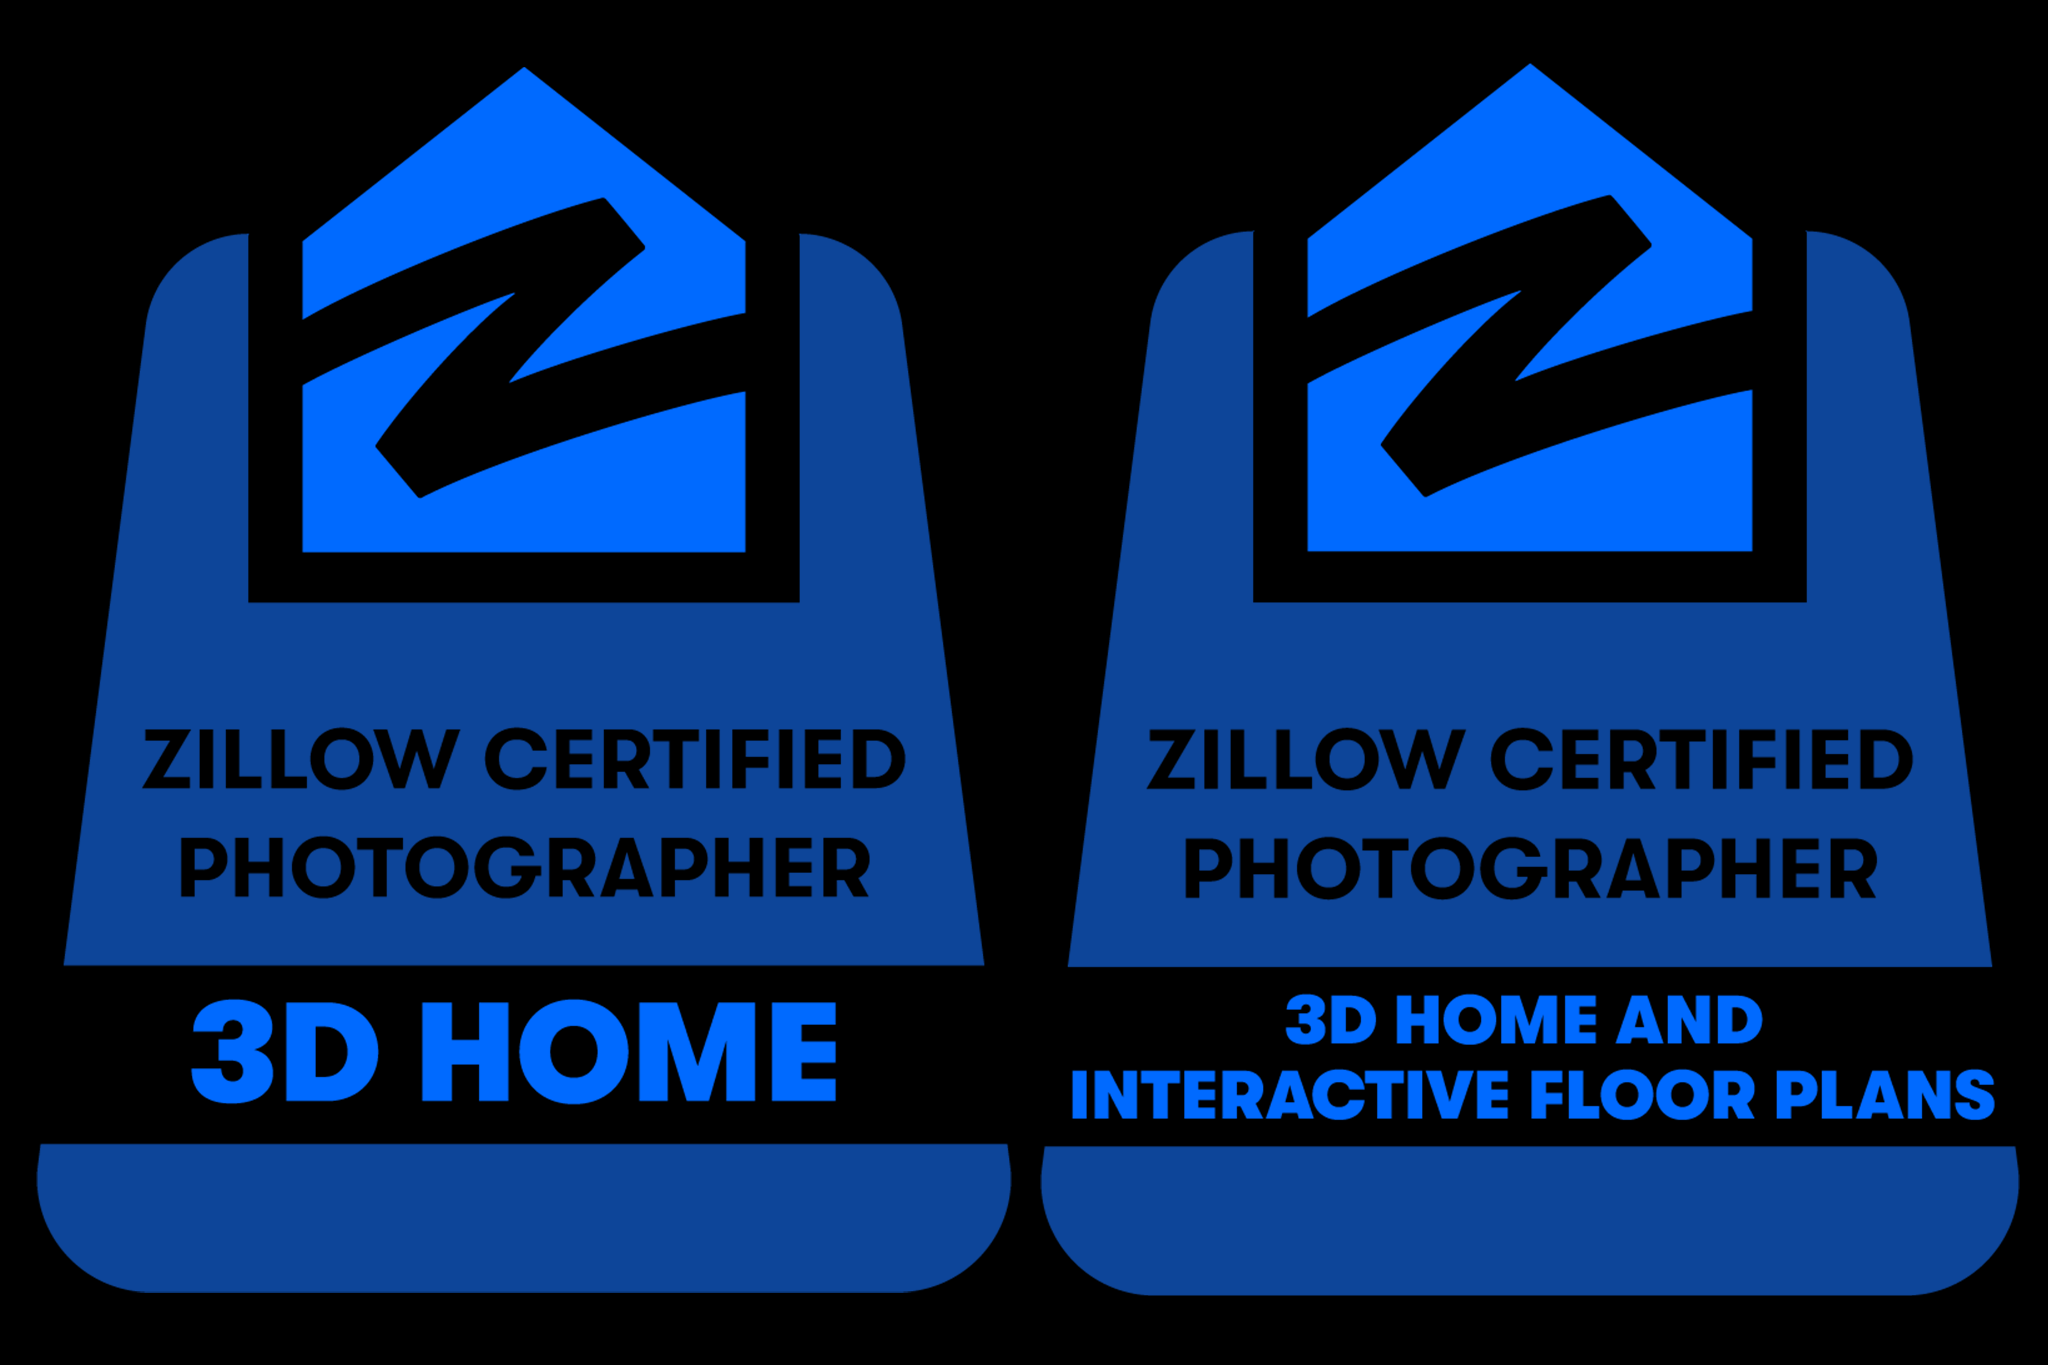 Las Vegas Zillow Certified Photographer - Vik Chohan Photography & Photo Booth - Real Esate Photography - Zillow 3D Tours - Blue.png